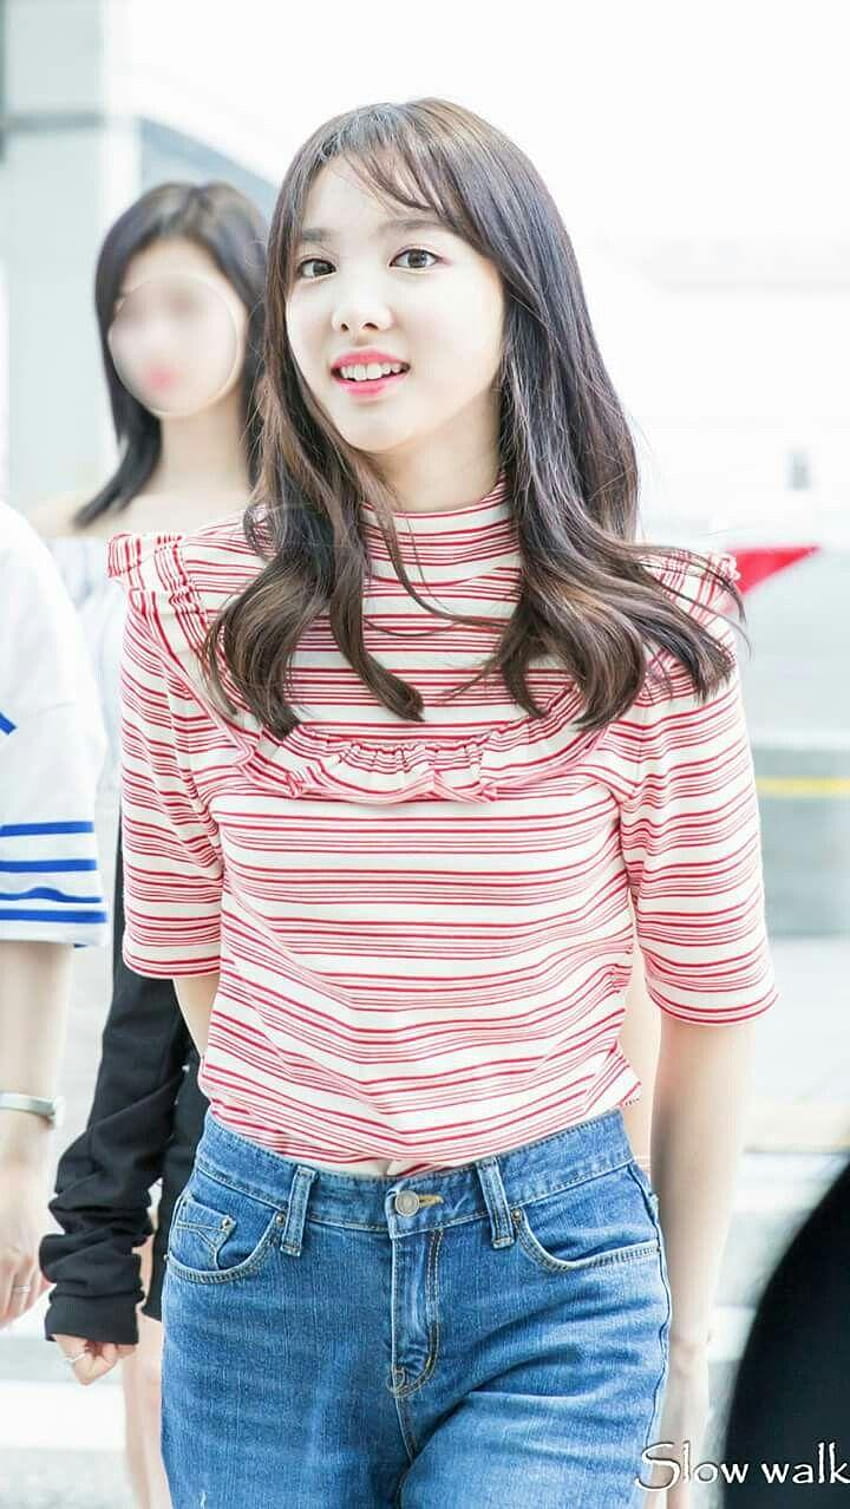 Twice nayeon. I love her style but... Why did they blurred Sana's HD phone wallpaper